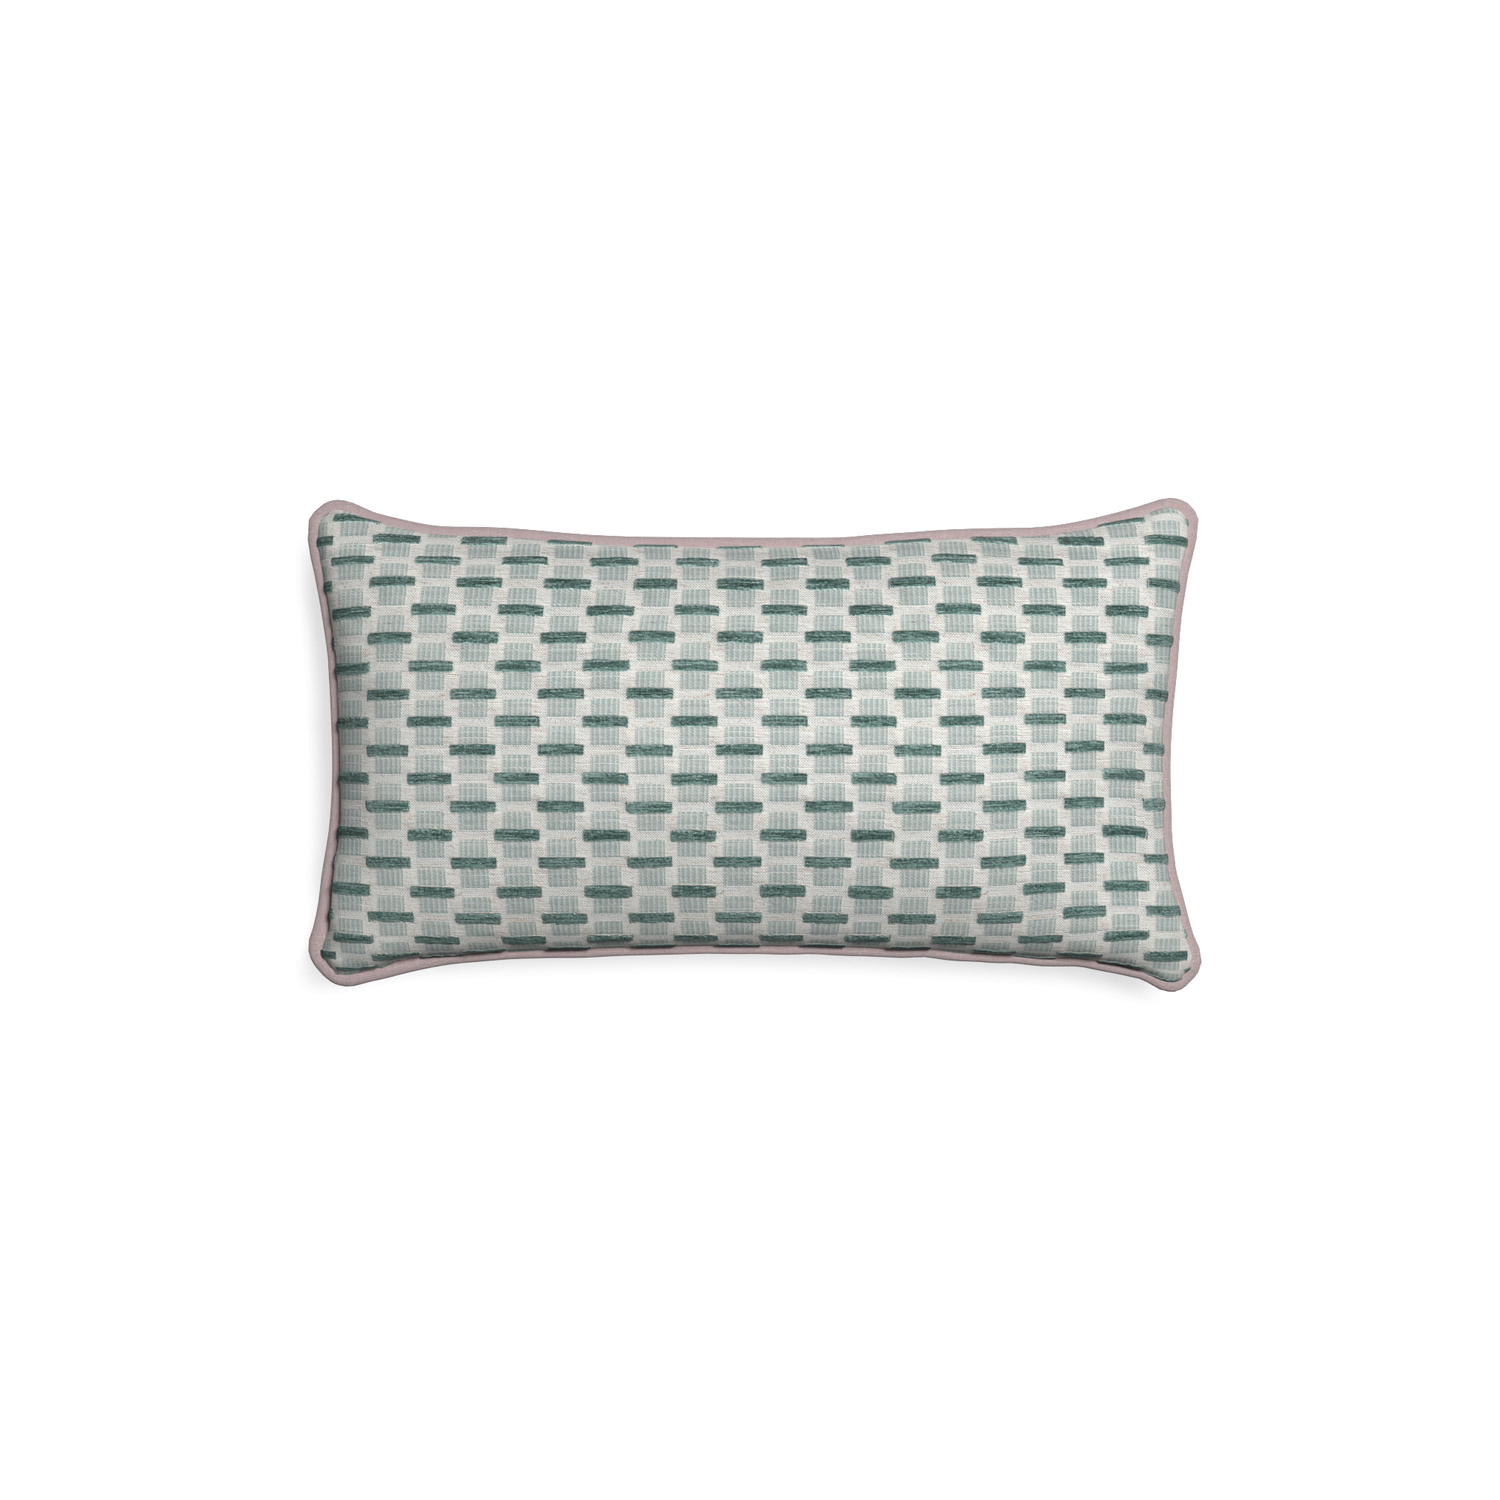 Petite-lumbar willow mint custom green geometric chenillepillow with orchid piping on white background